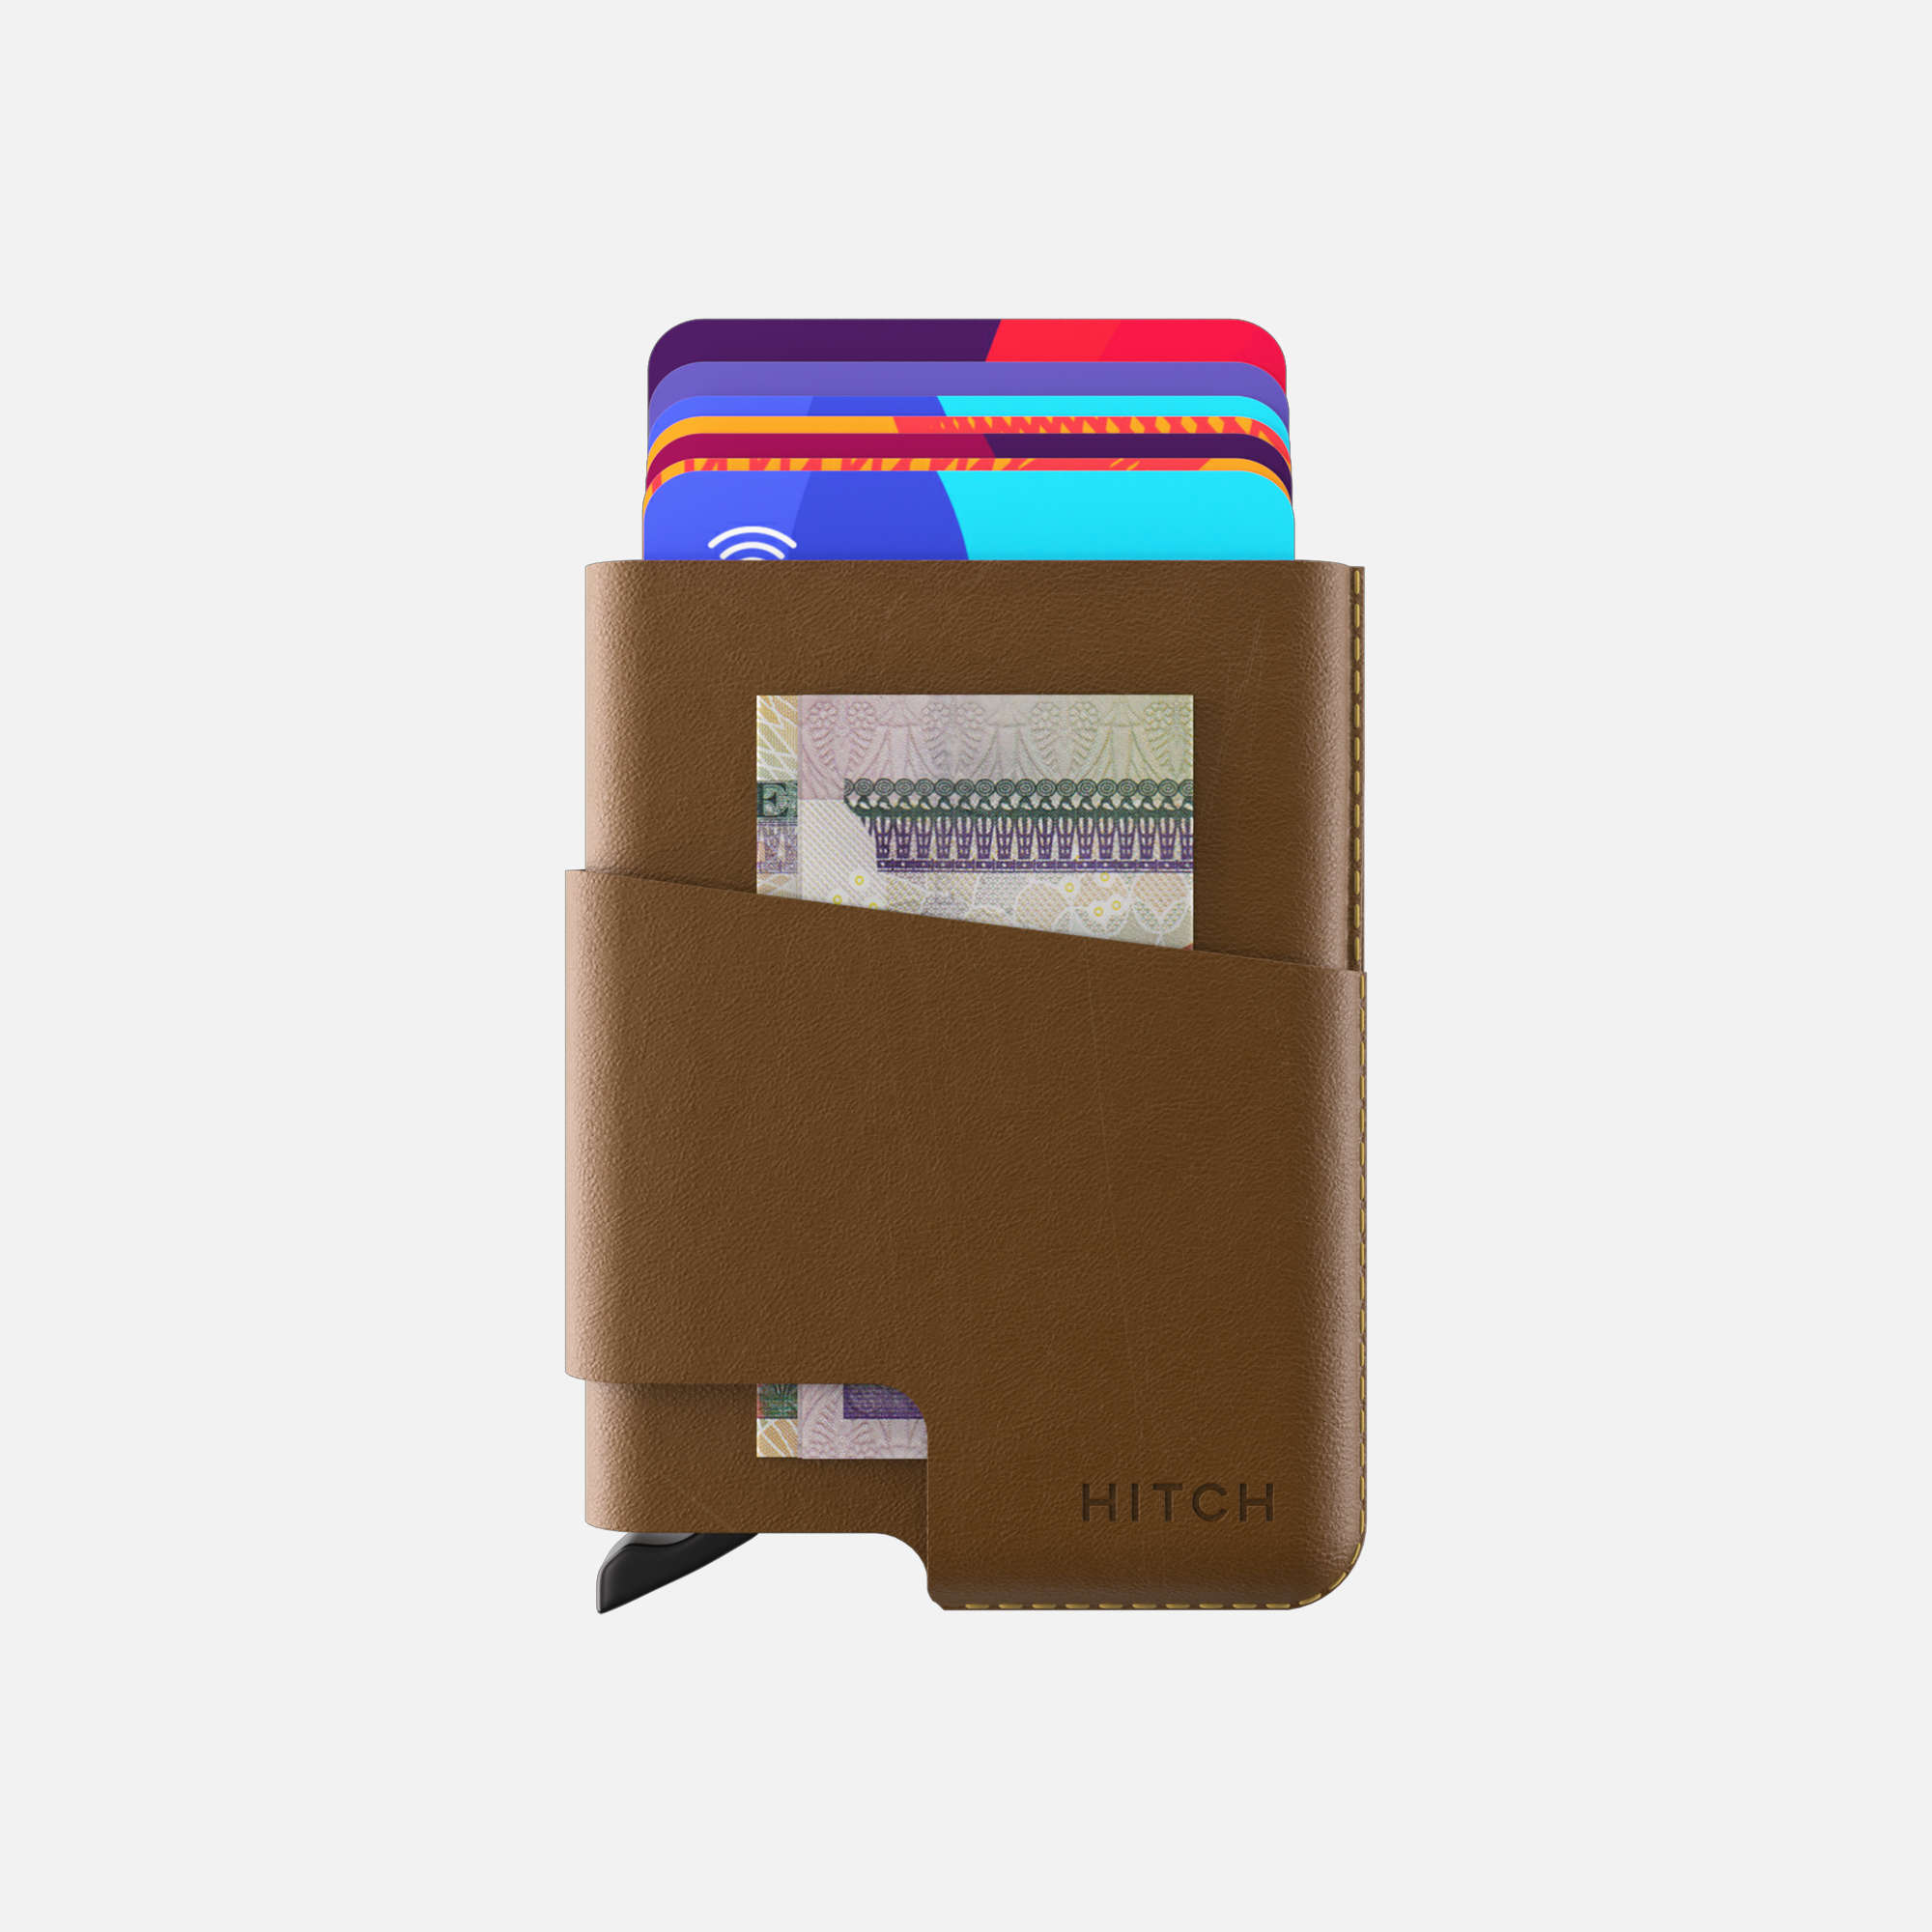 Brown leather wallet with credit cards and cash visible on white background.